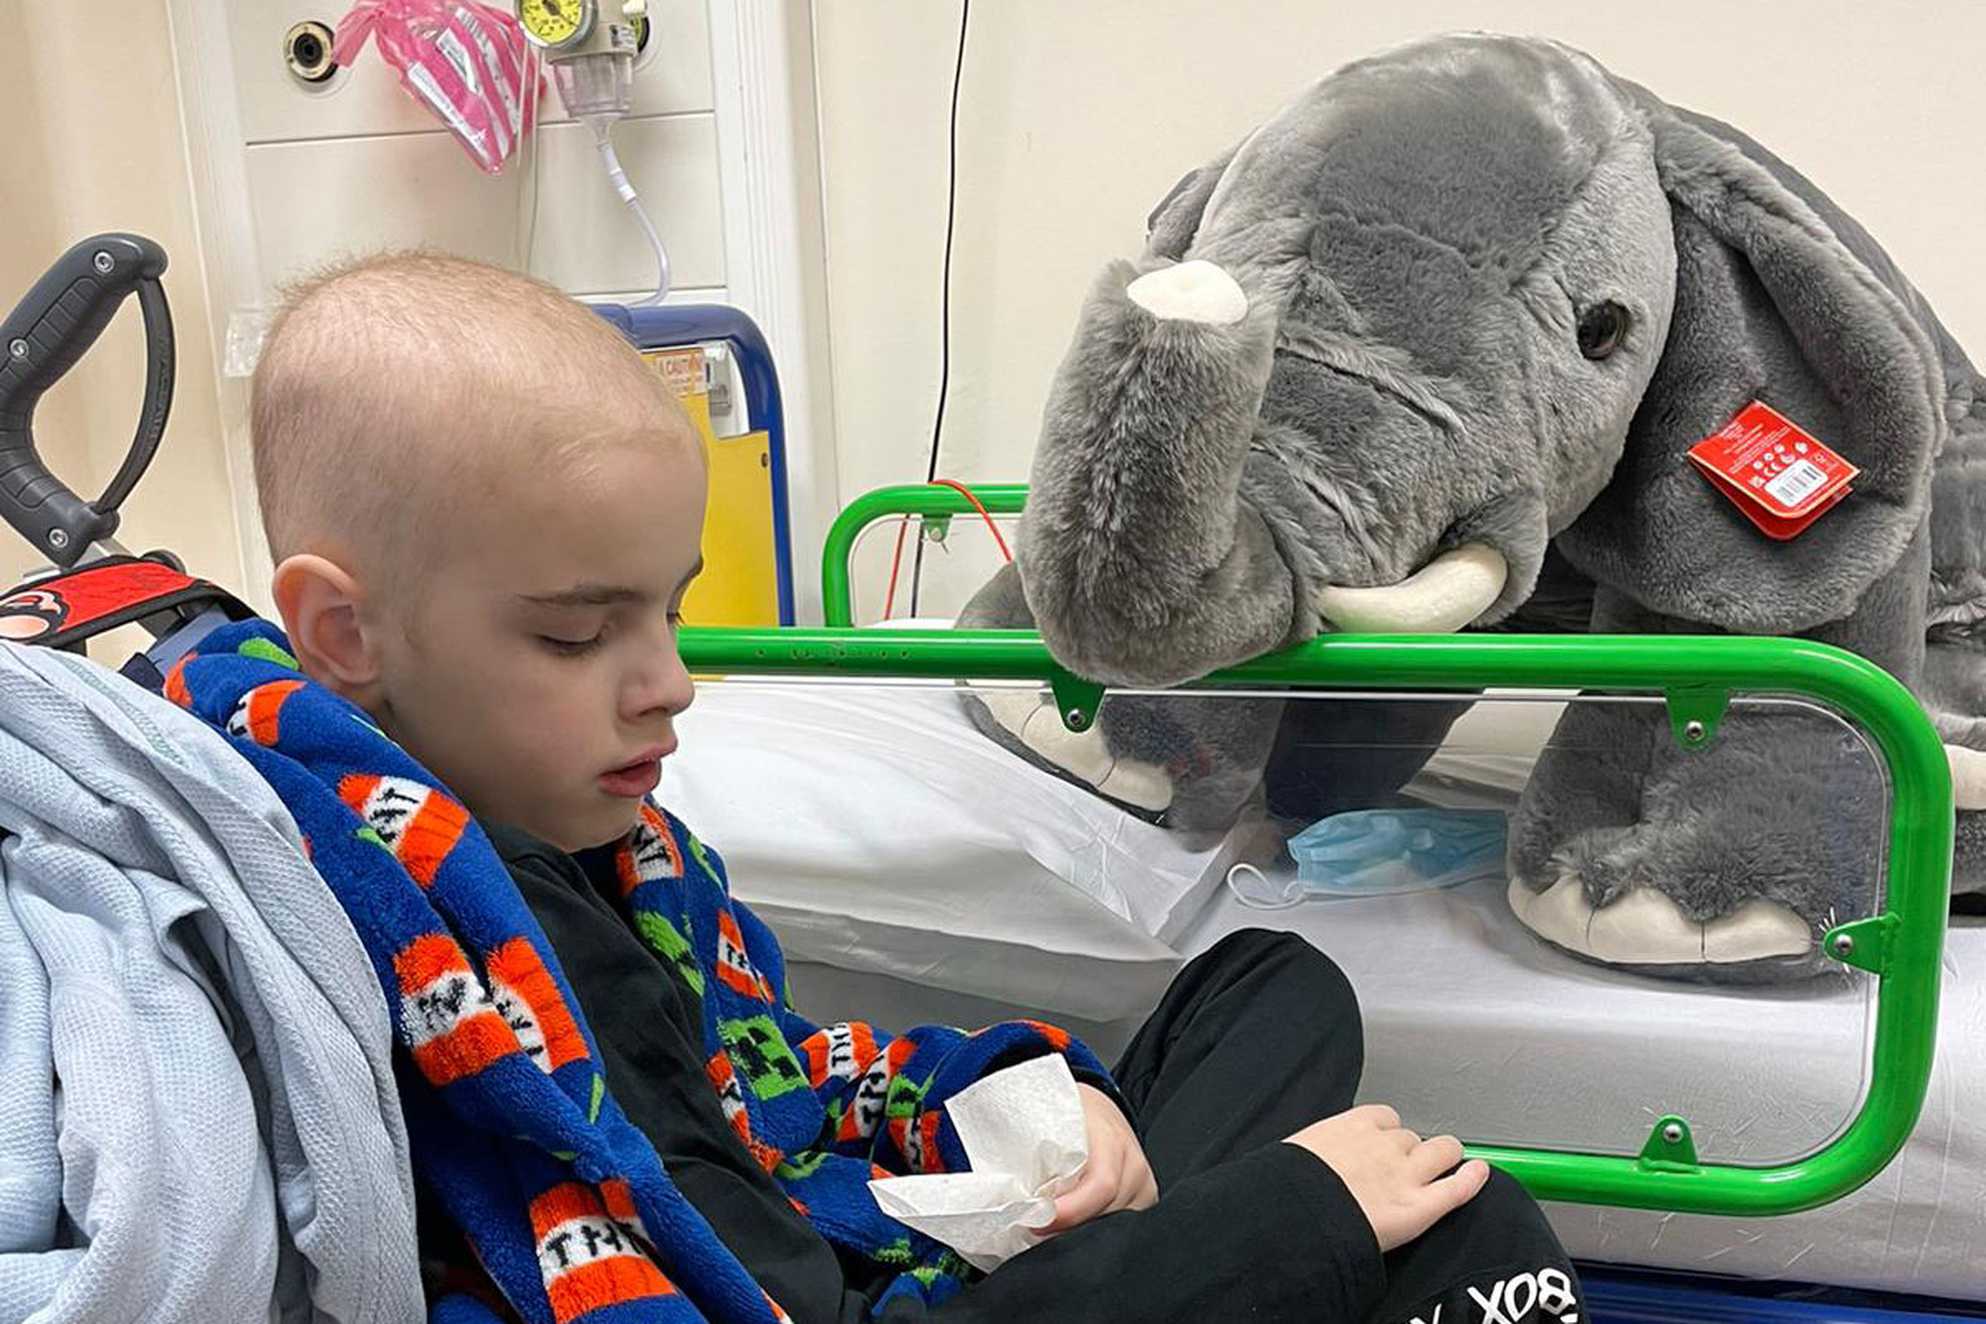 Joshua in hospital, with a large plush elephant sitting on his hospital bed.